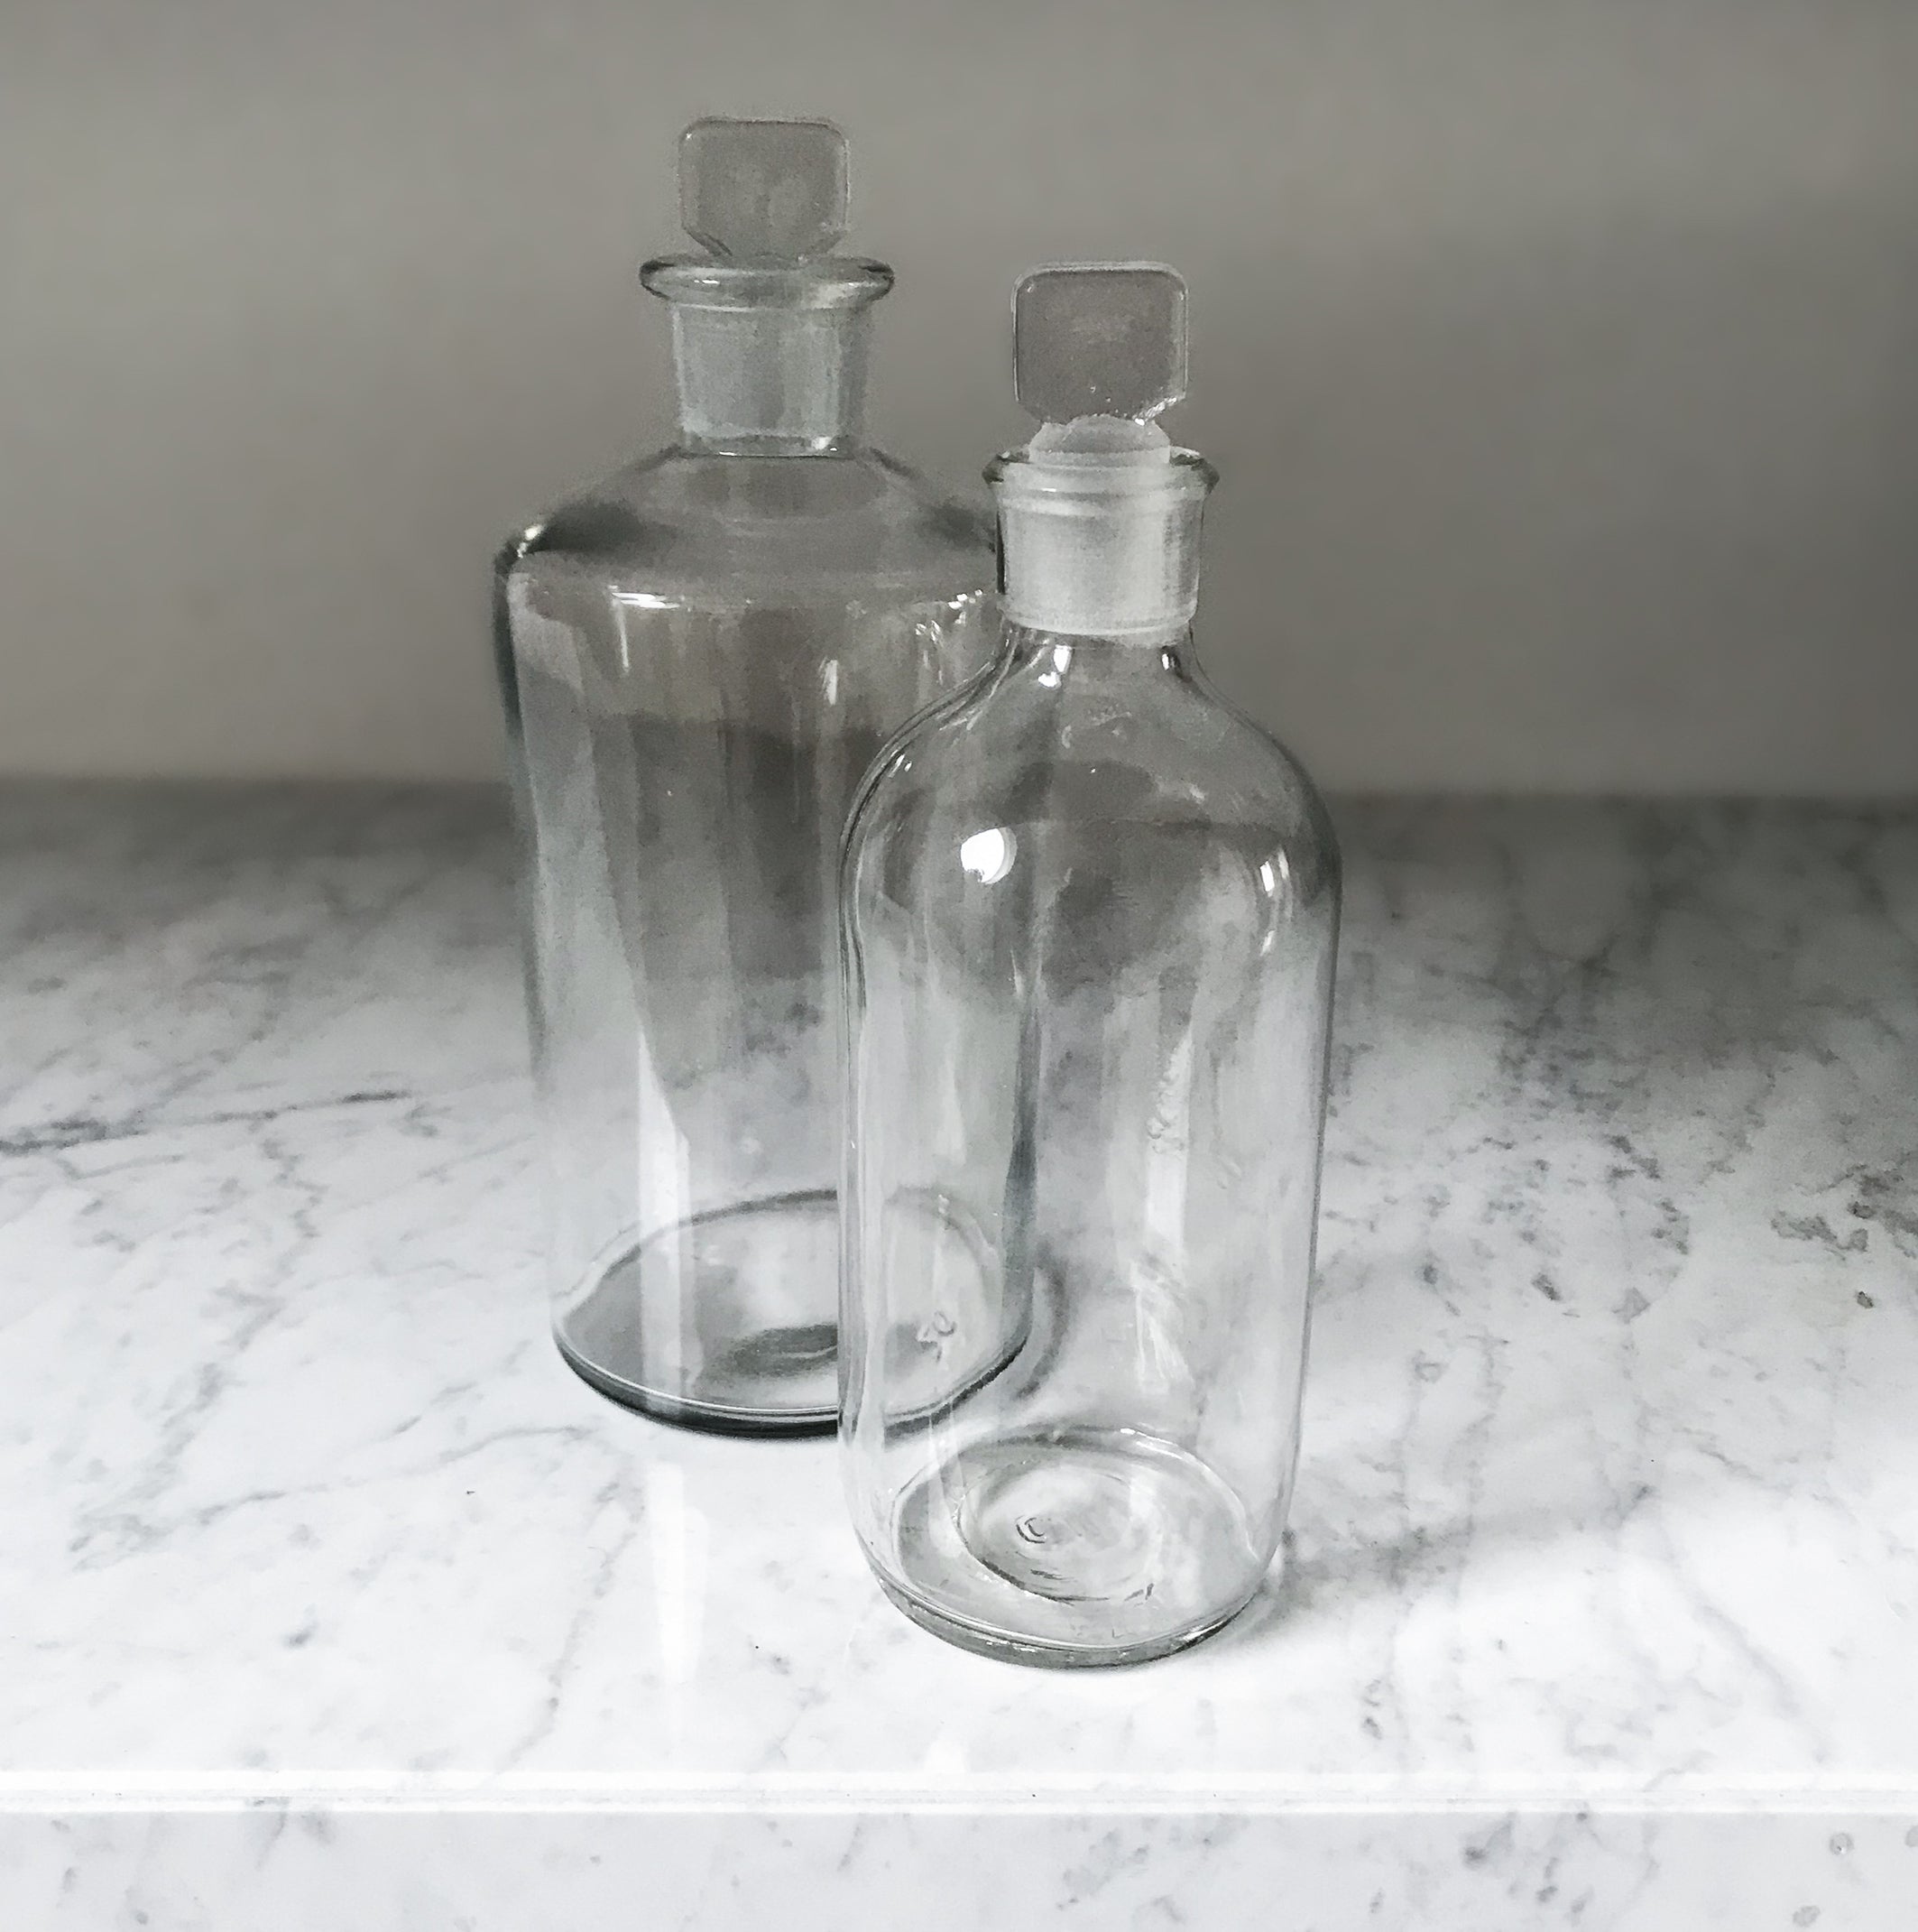 Large vintage clear glass Apothecary bottle with clear glass stopper - SHOP NOW - www.intovintage.co.uk